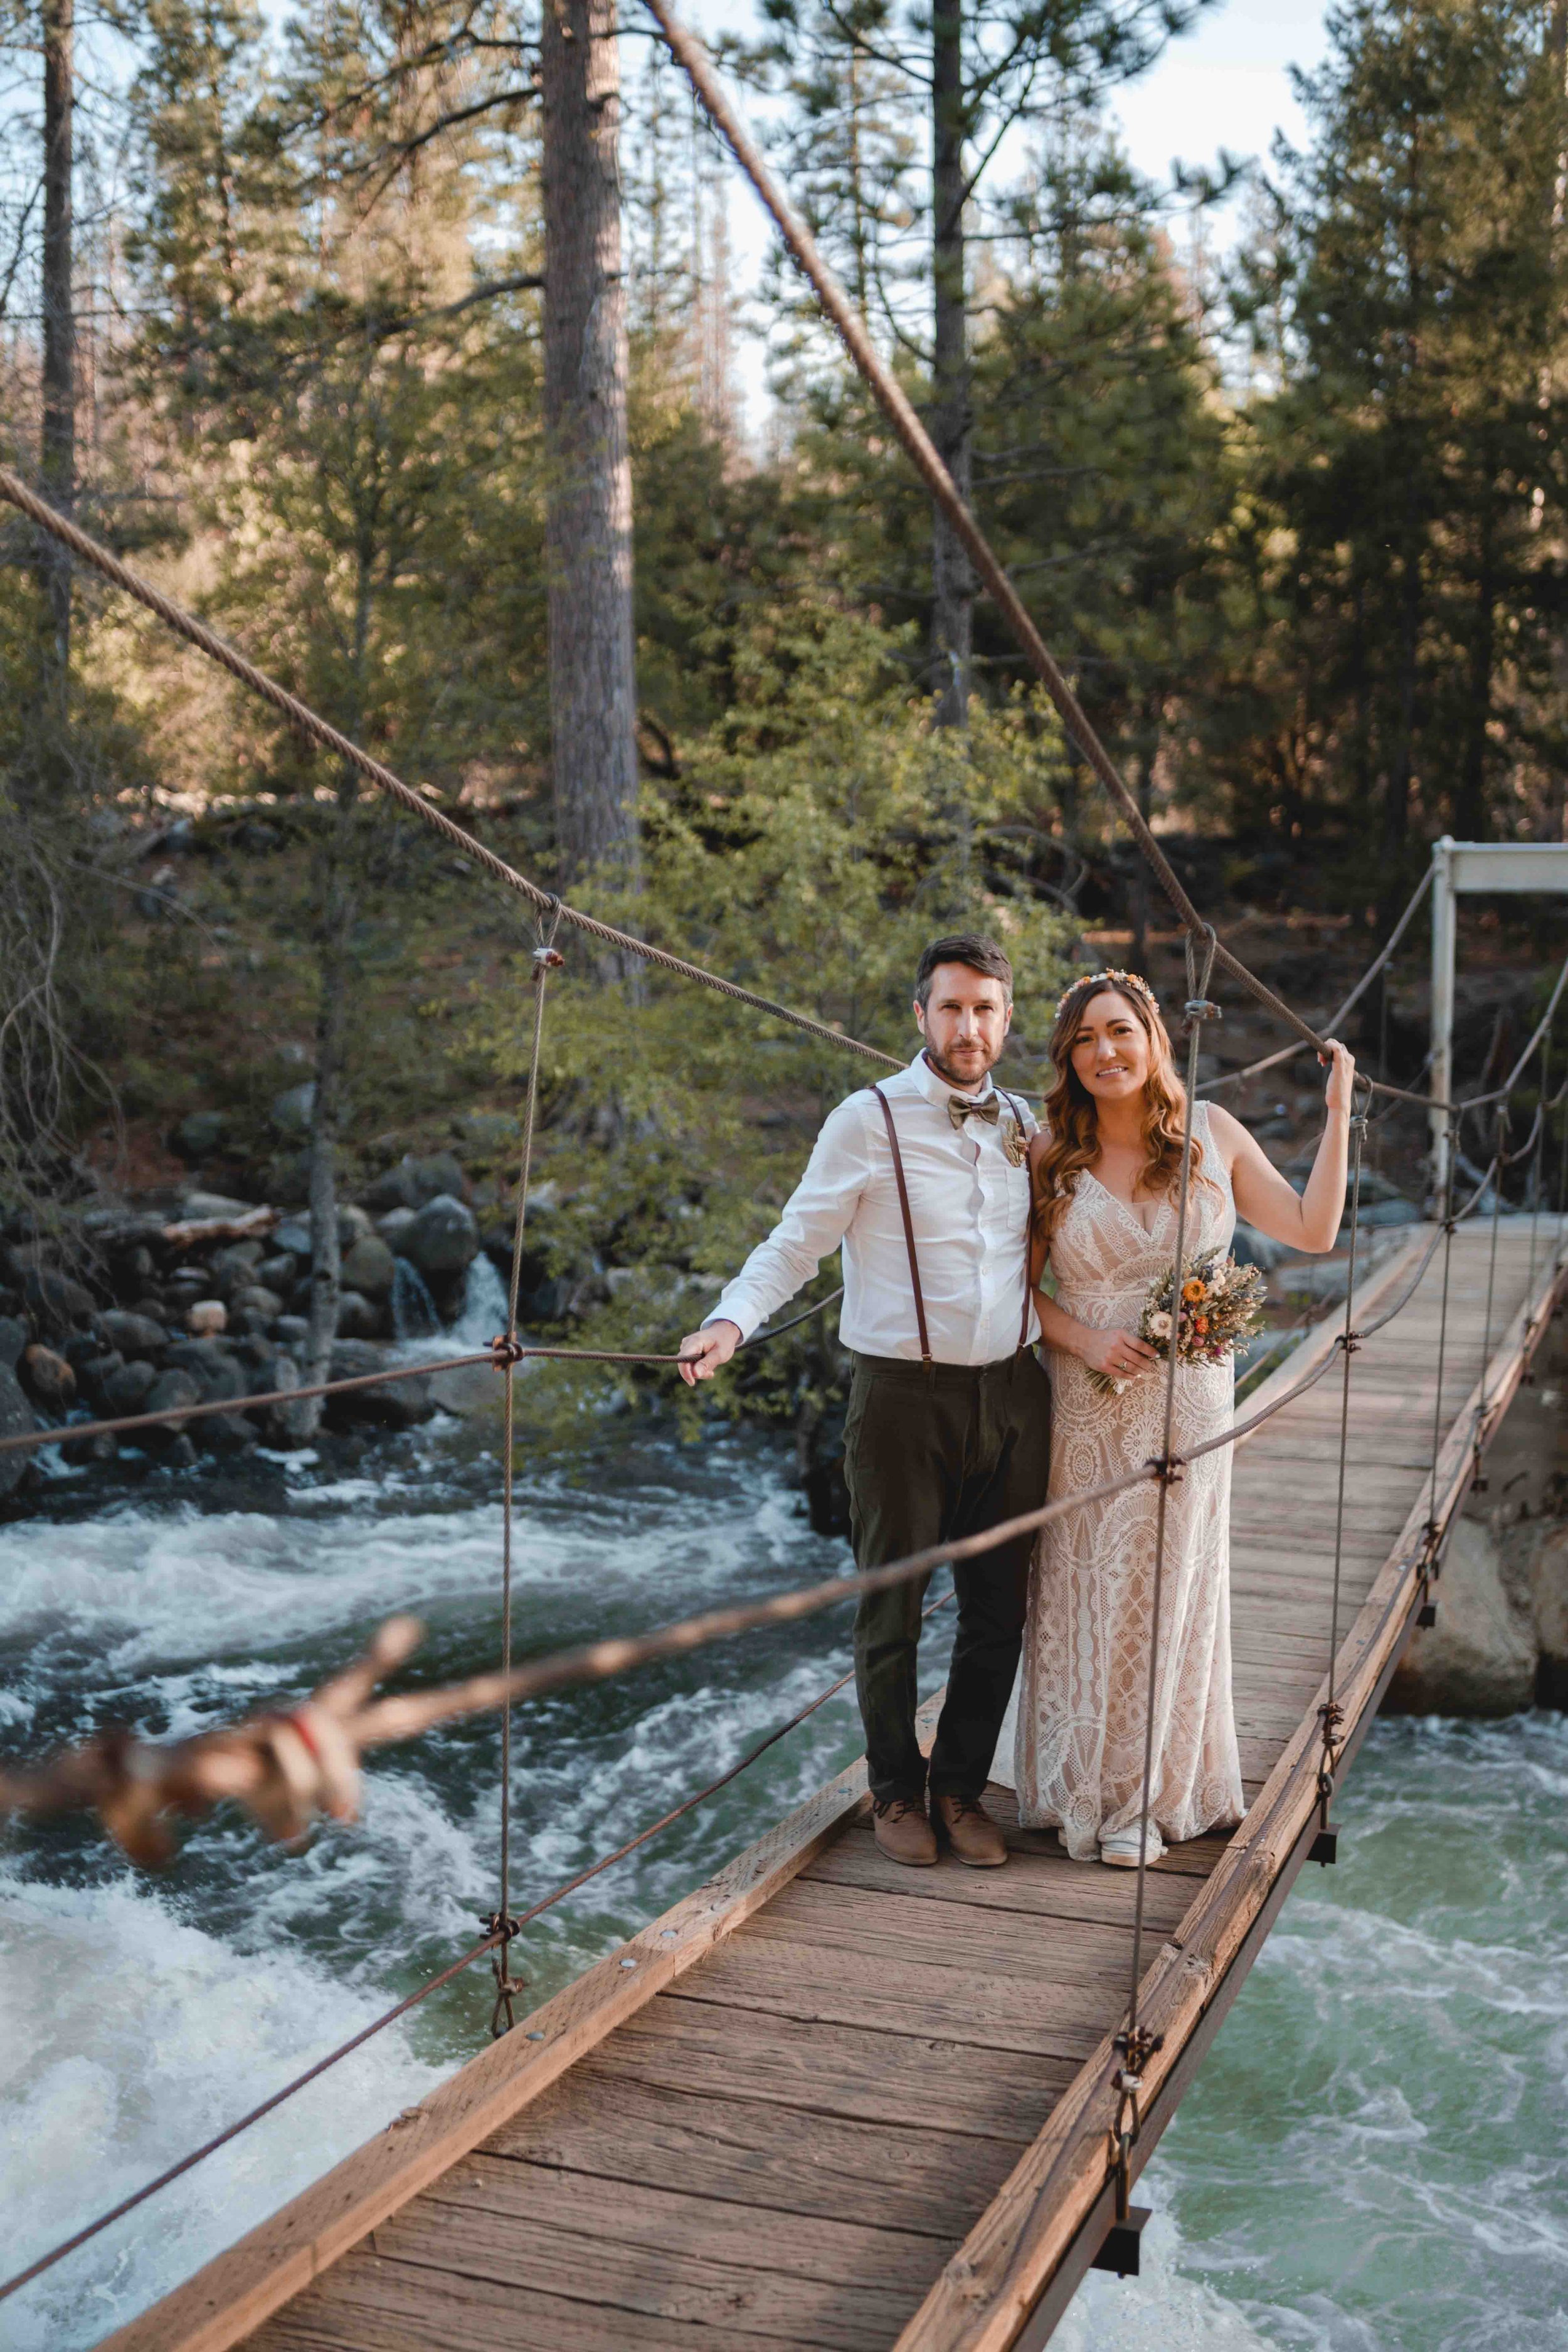 Newly weds standing on a bridge at sunset